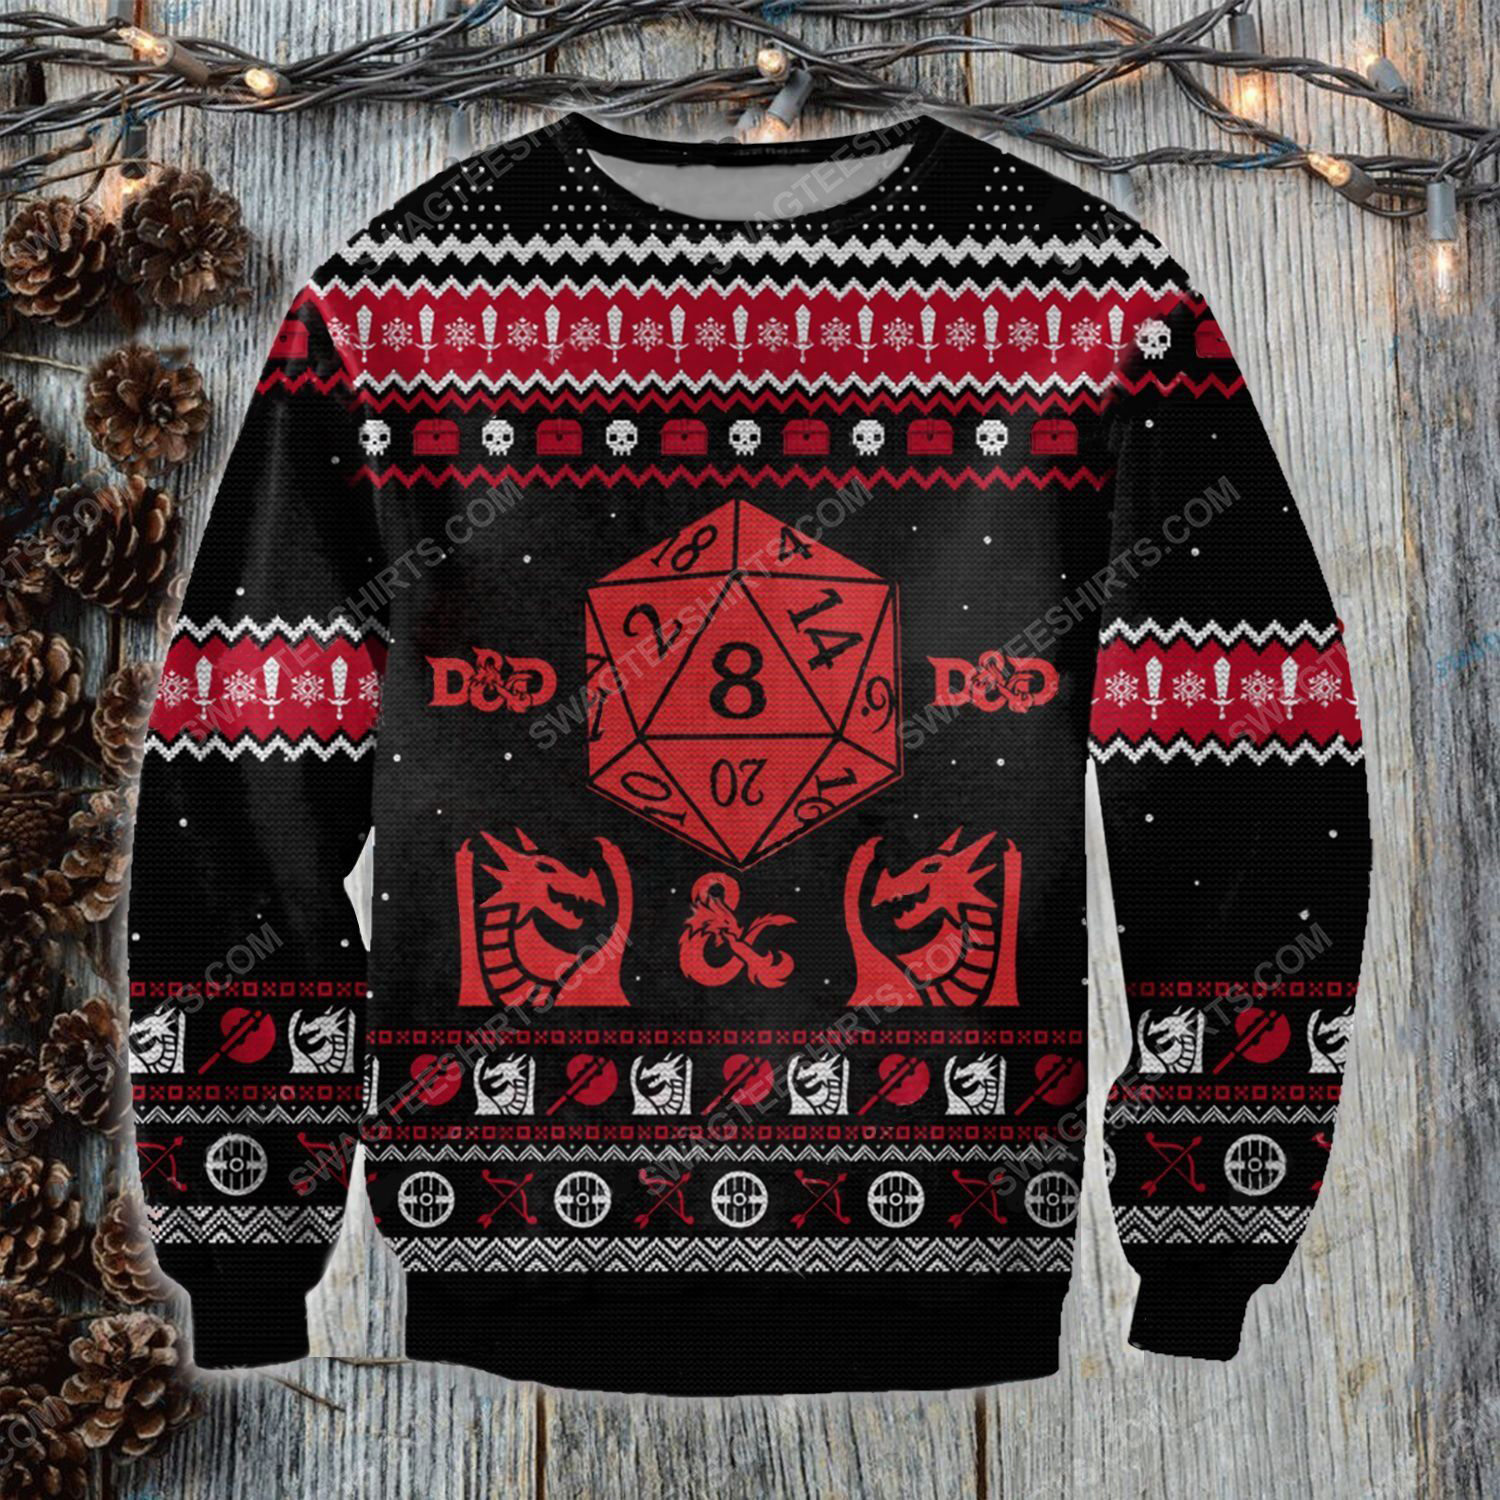 The dungeons and dragons game ugly christmas sweater